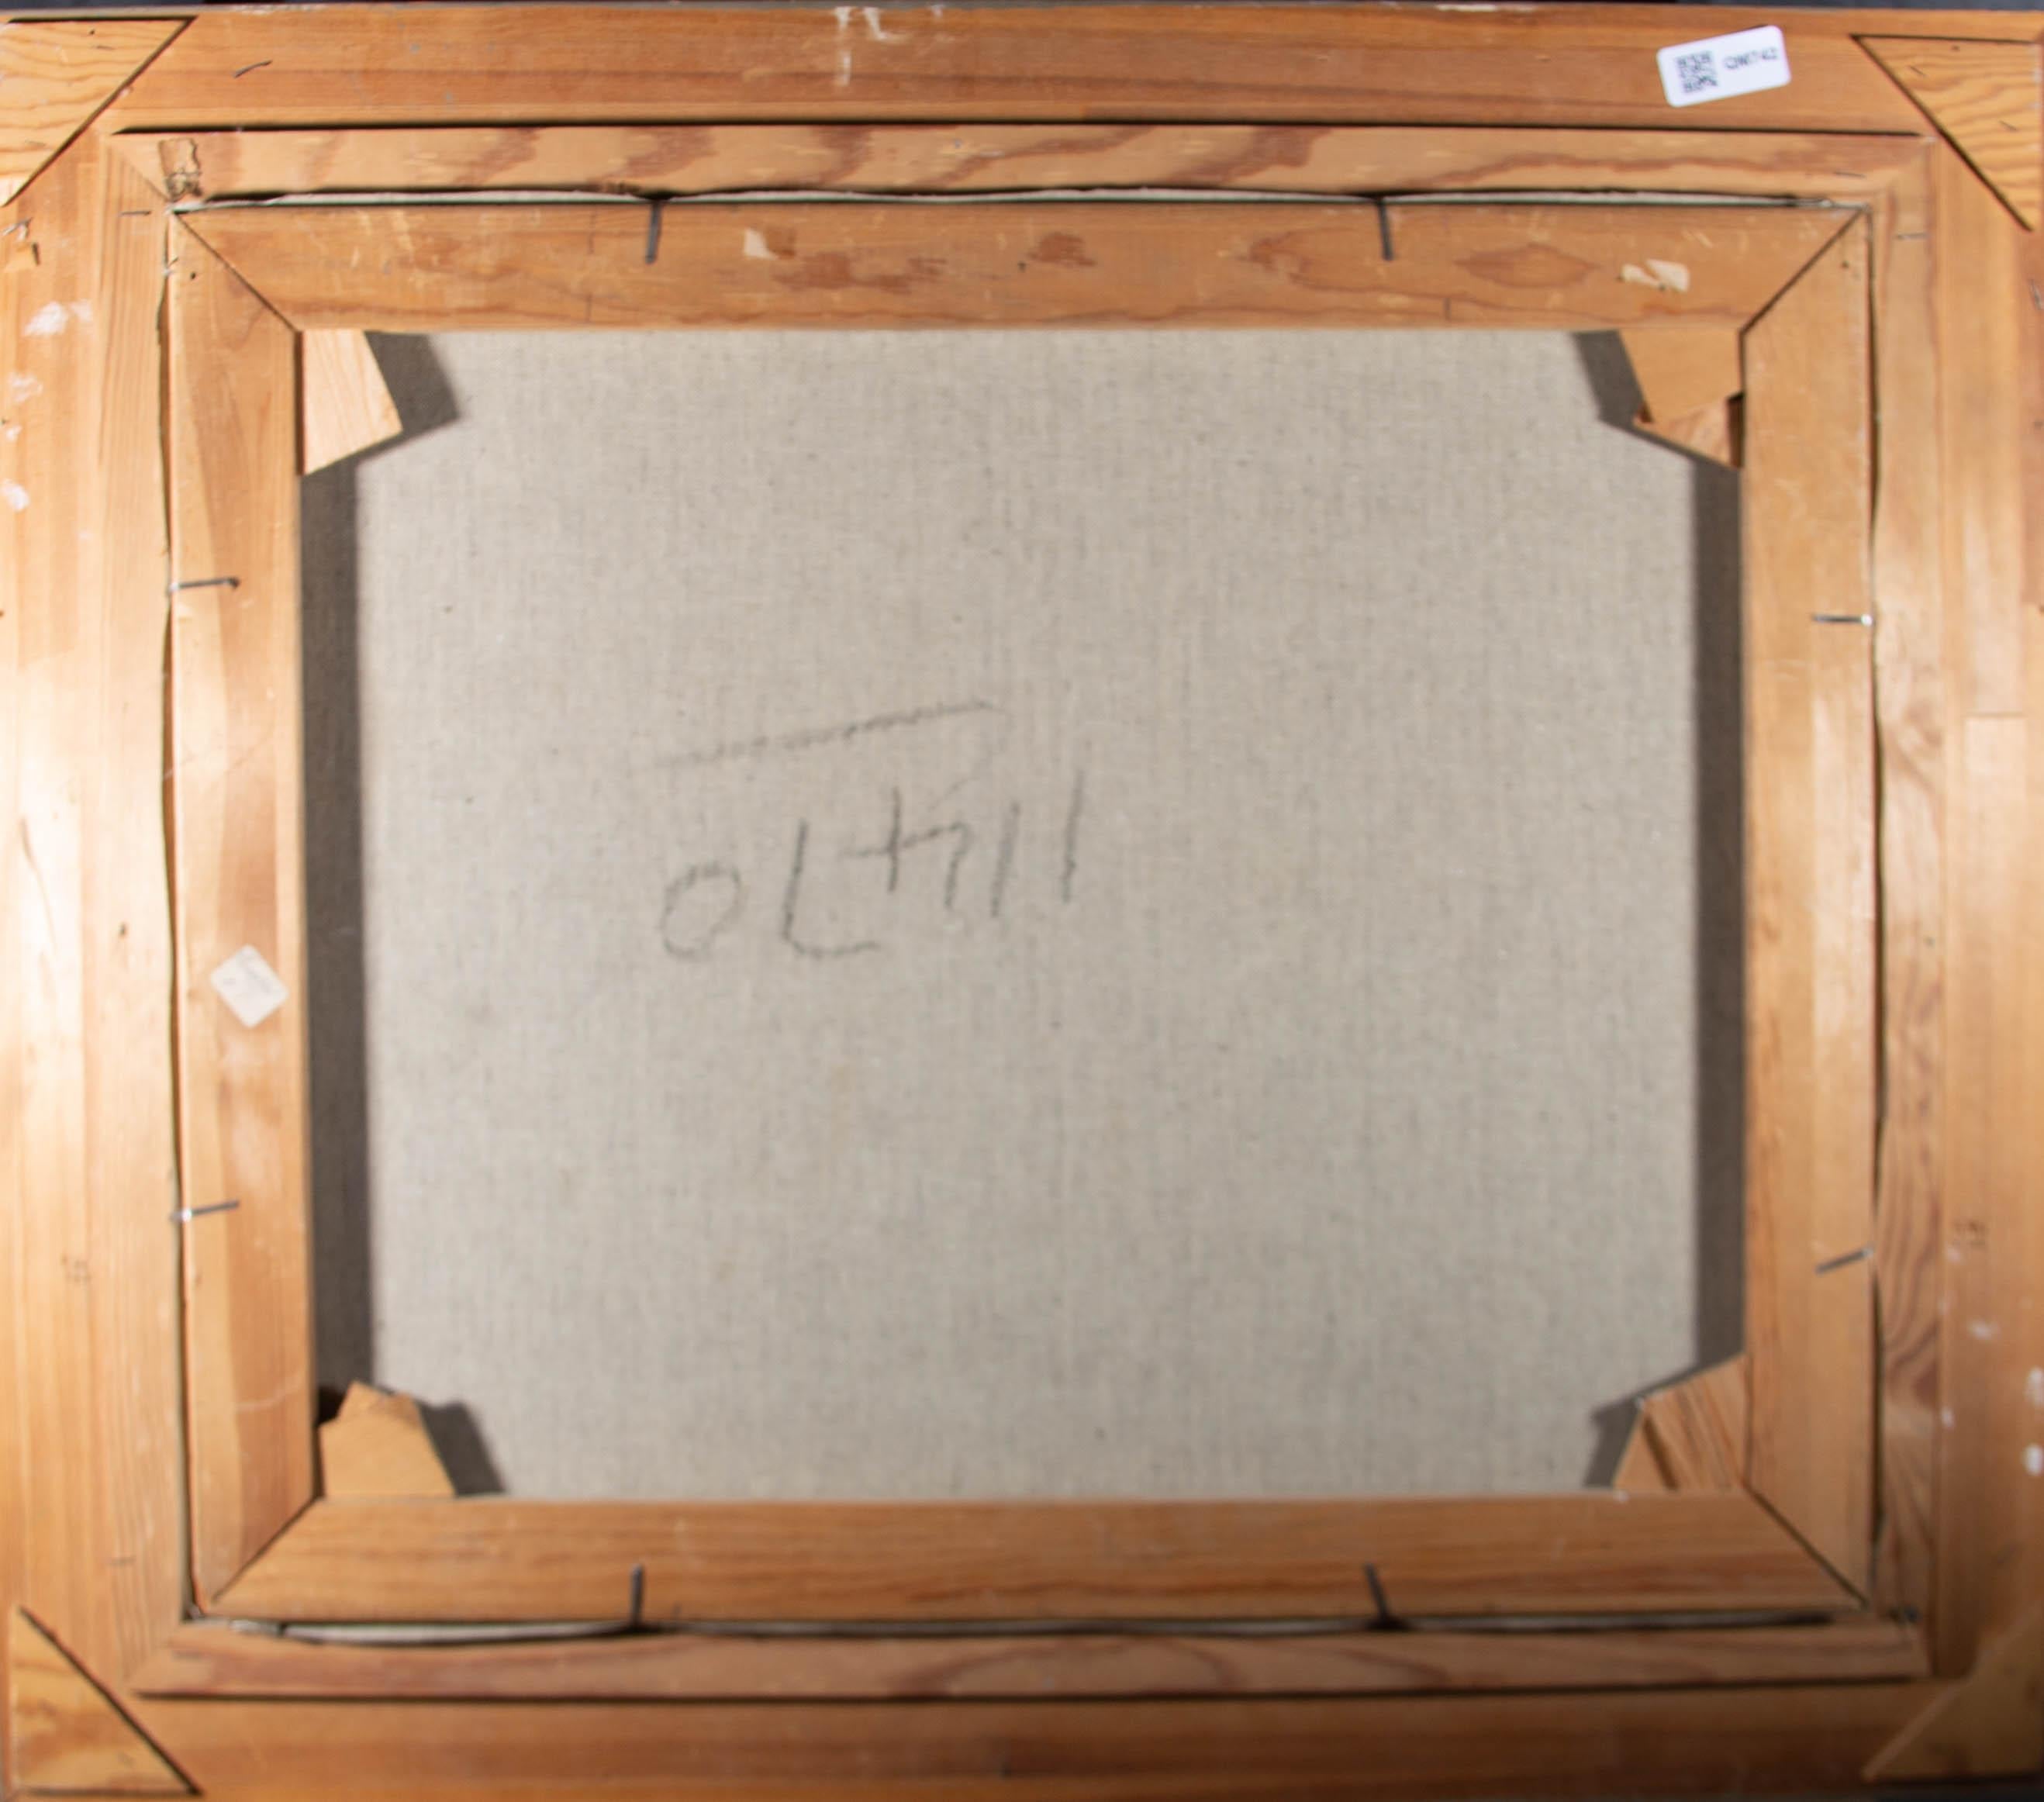 Well presented in a gilt effect frame with linen slip. Inscribed with the location to the lower right and signed indistinctly. On canvas on stretchers.
